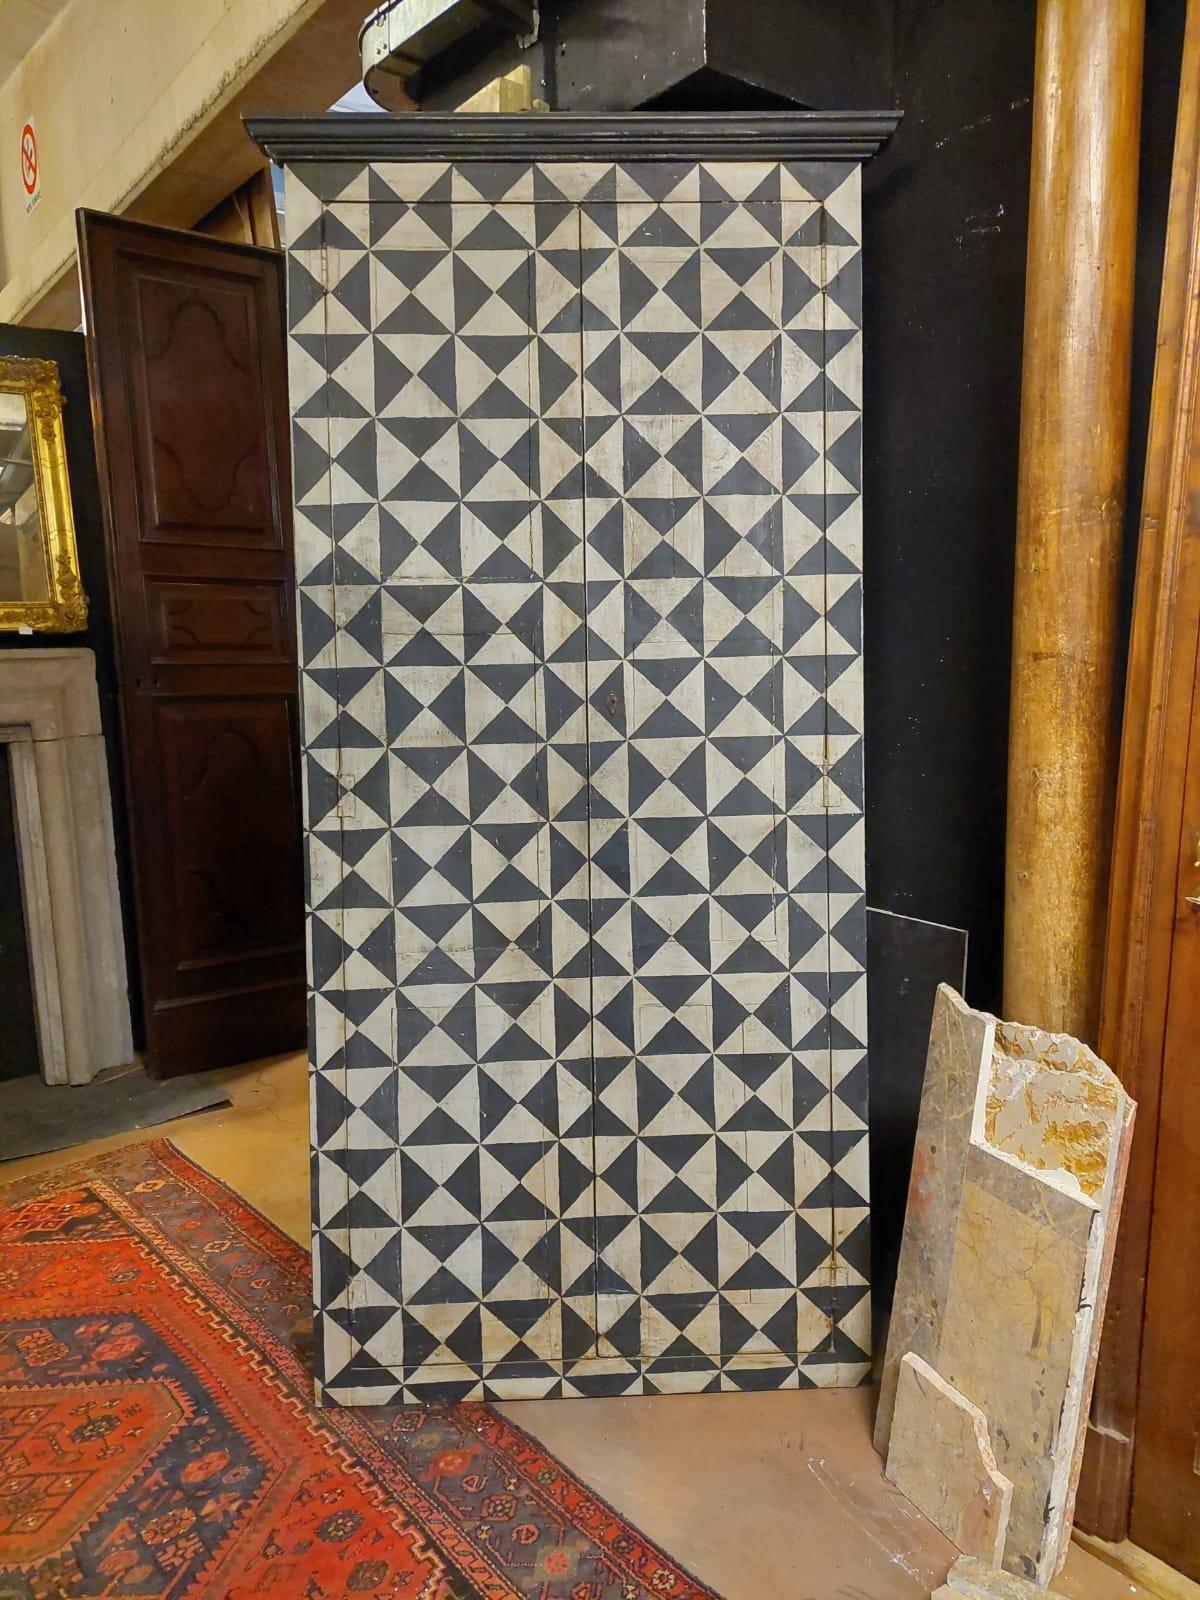 Antique vintage door / wardrobe, lacquered wardrobe with optical theme, typical of the early 1900s, comes from a home in Italy (Florence), the wallpaper of the time that they had throughout the house continued.
It has a double-leaf pull opening, as